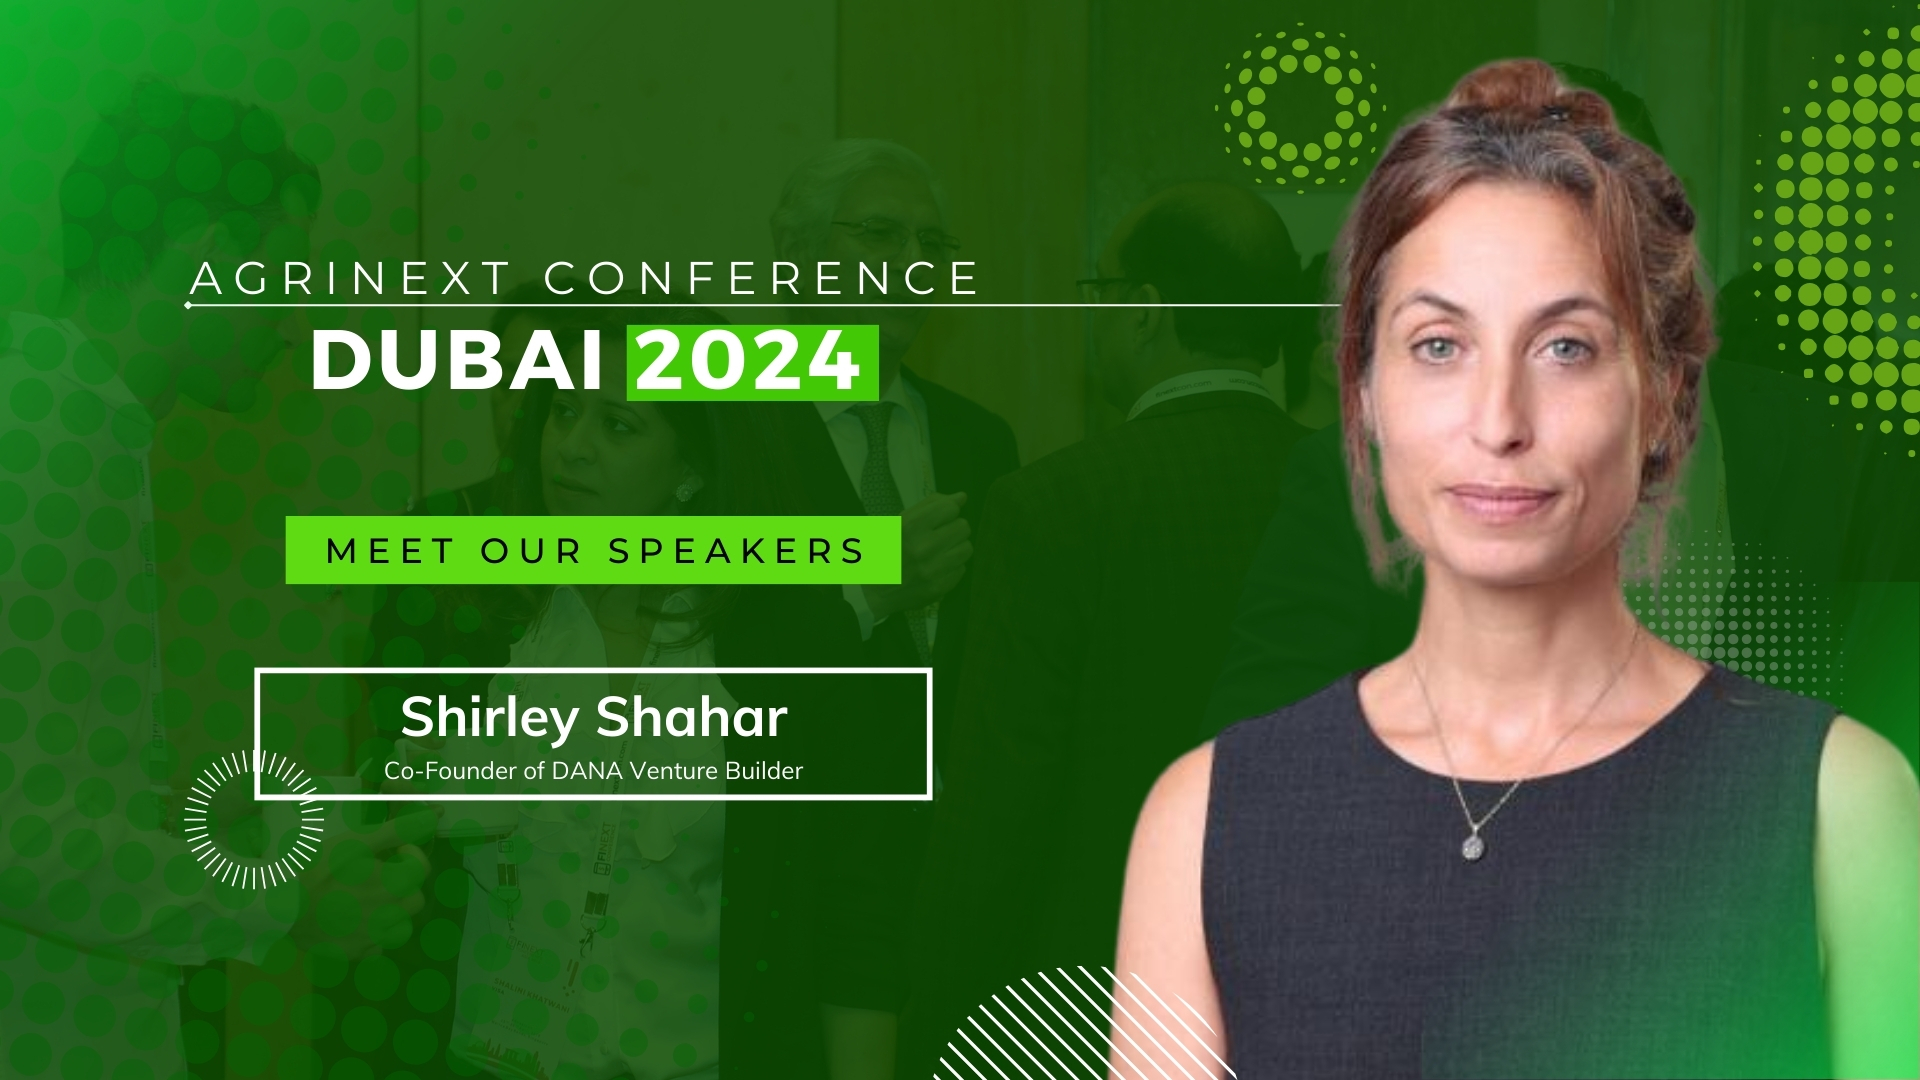 Shirley Shahar to Keynote AgriNext Conference in Dubai 2024